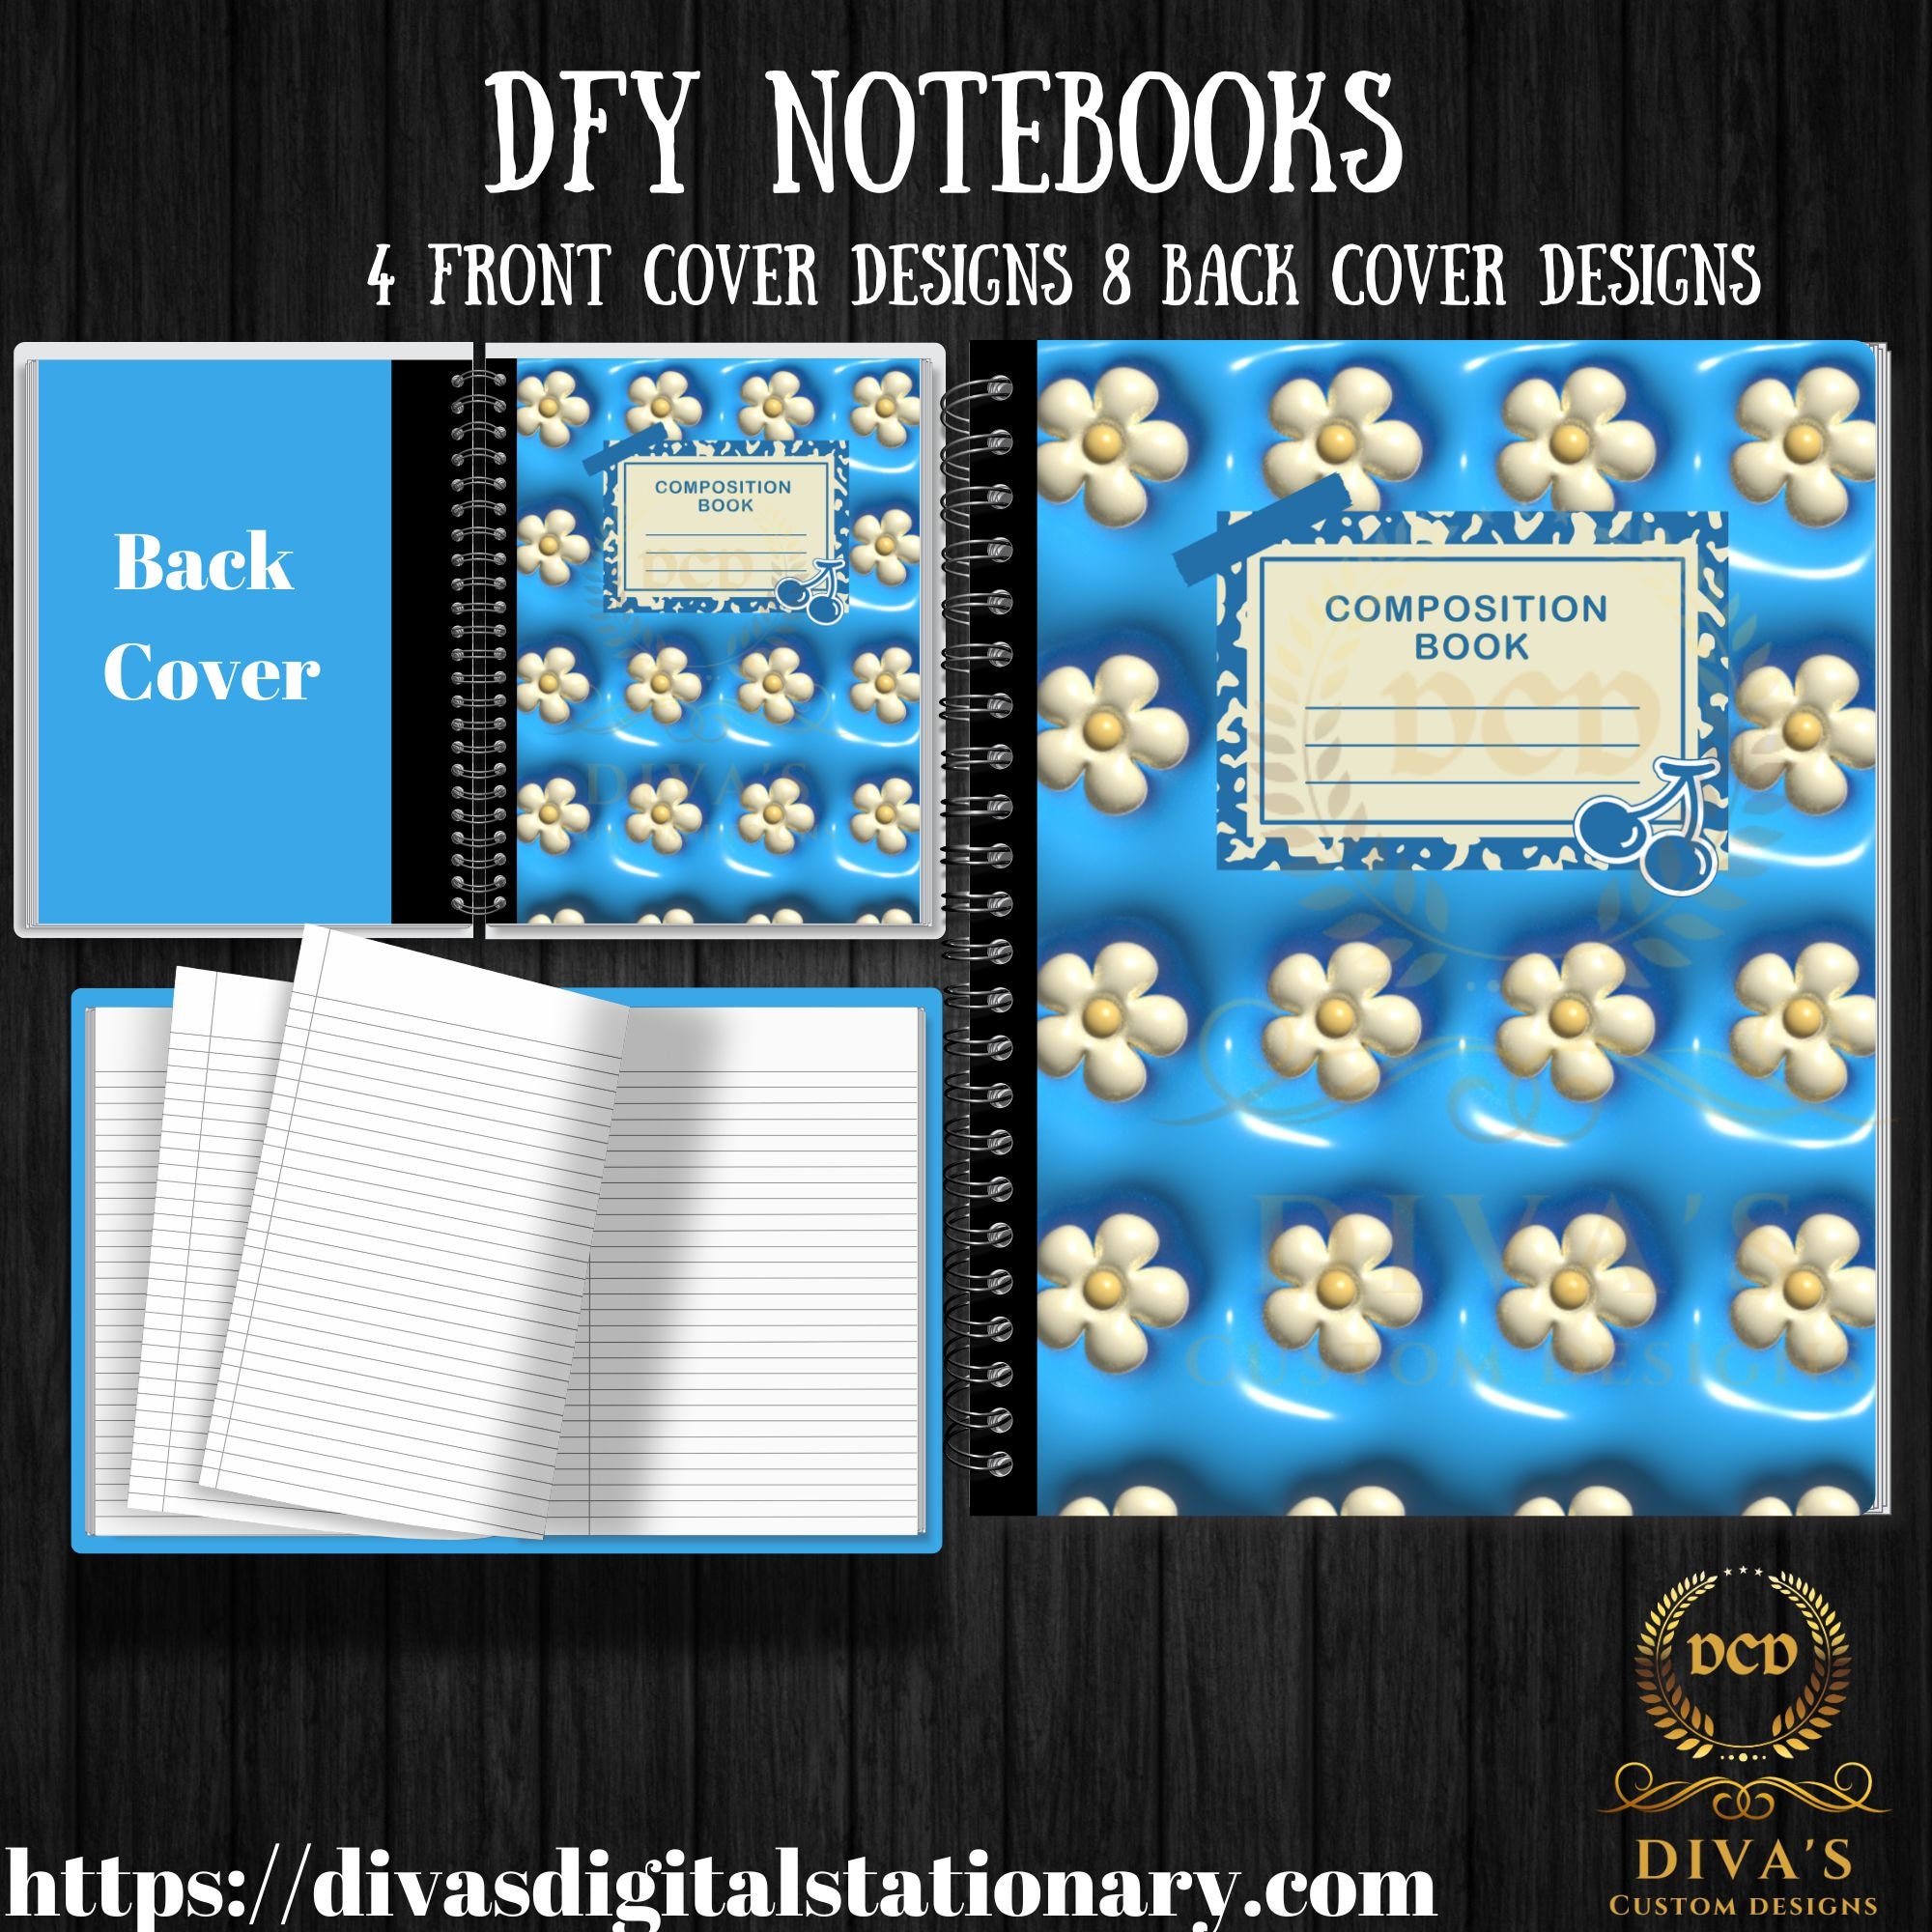 316,489 Notebook Cover Design Images, Stock Photos, 3D objects, & Vectors